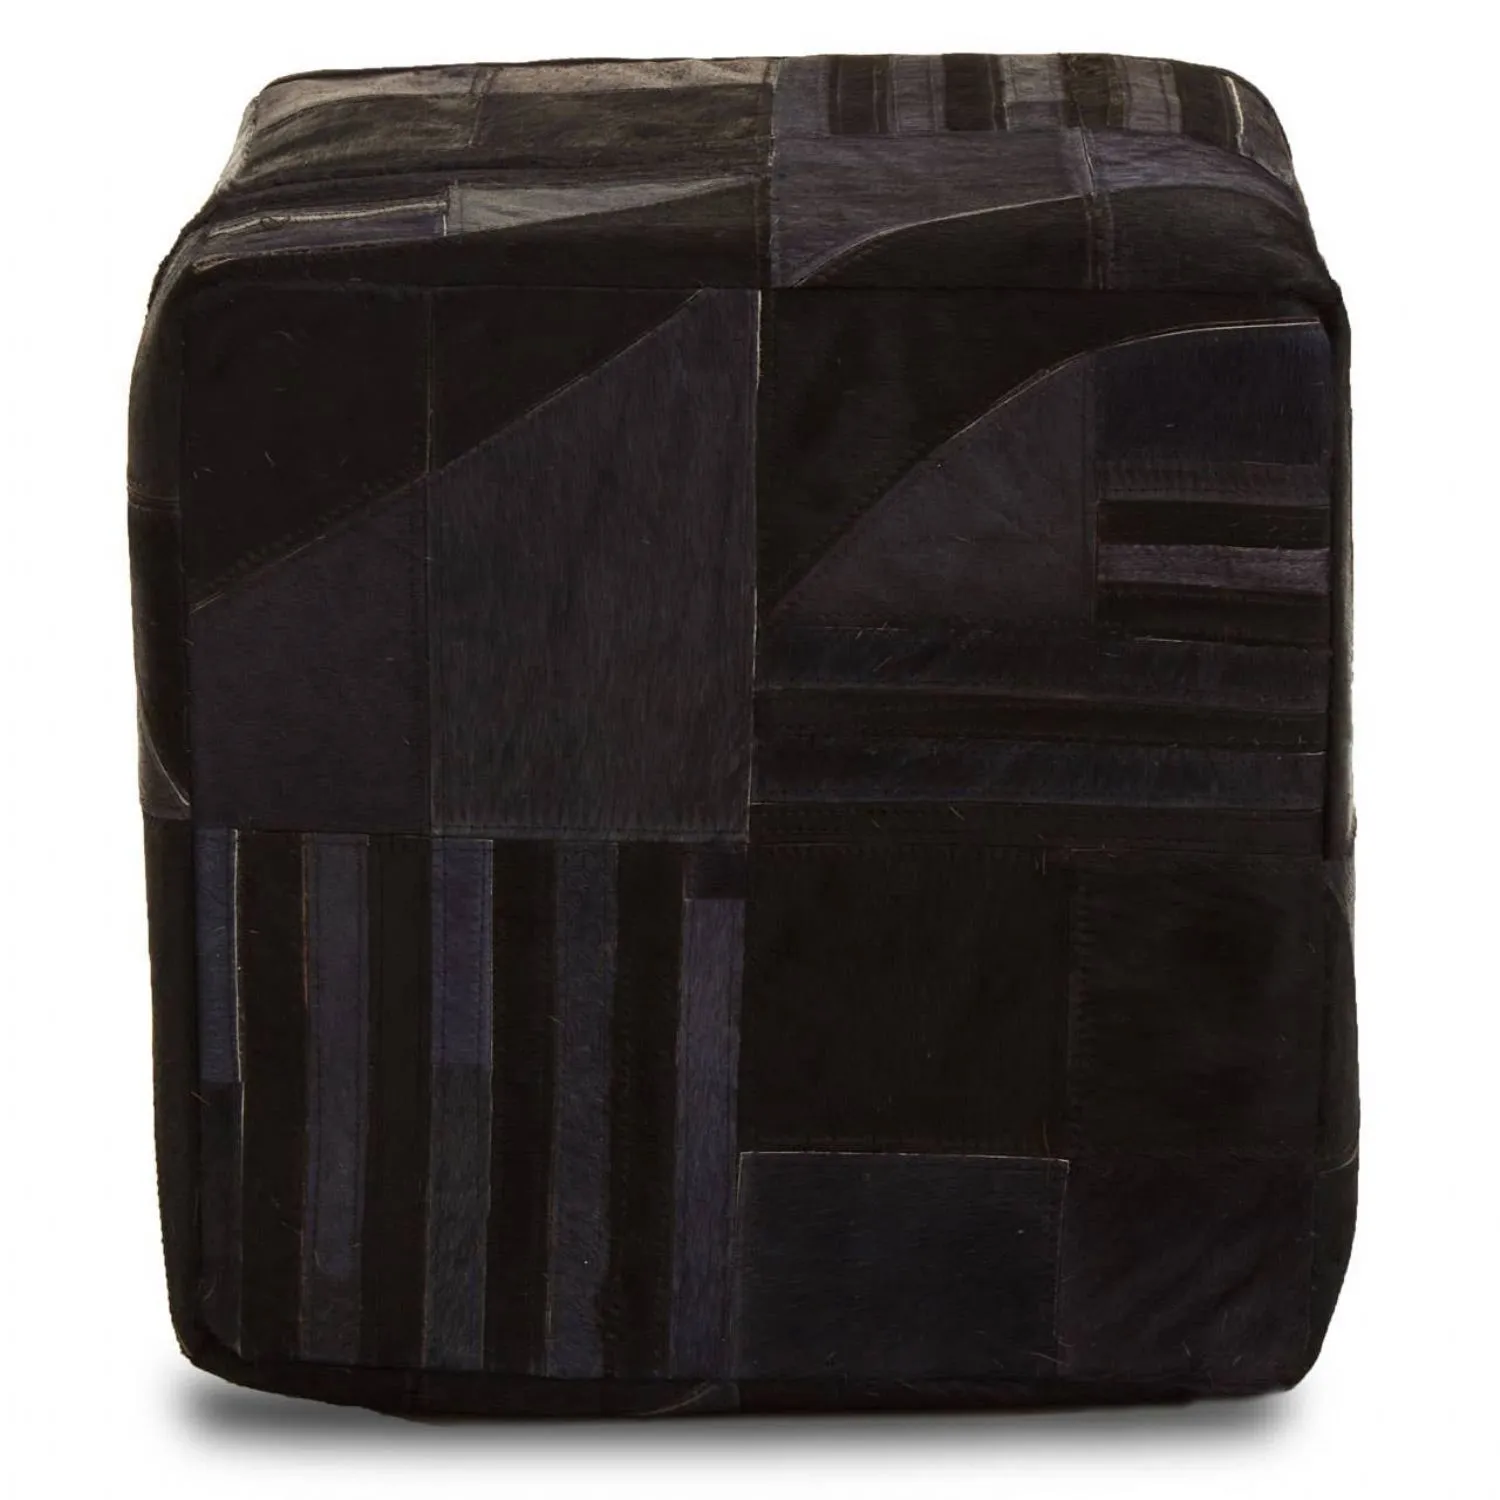 Safira Black and Grey Leather Pouffe